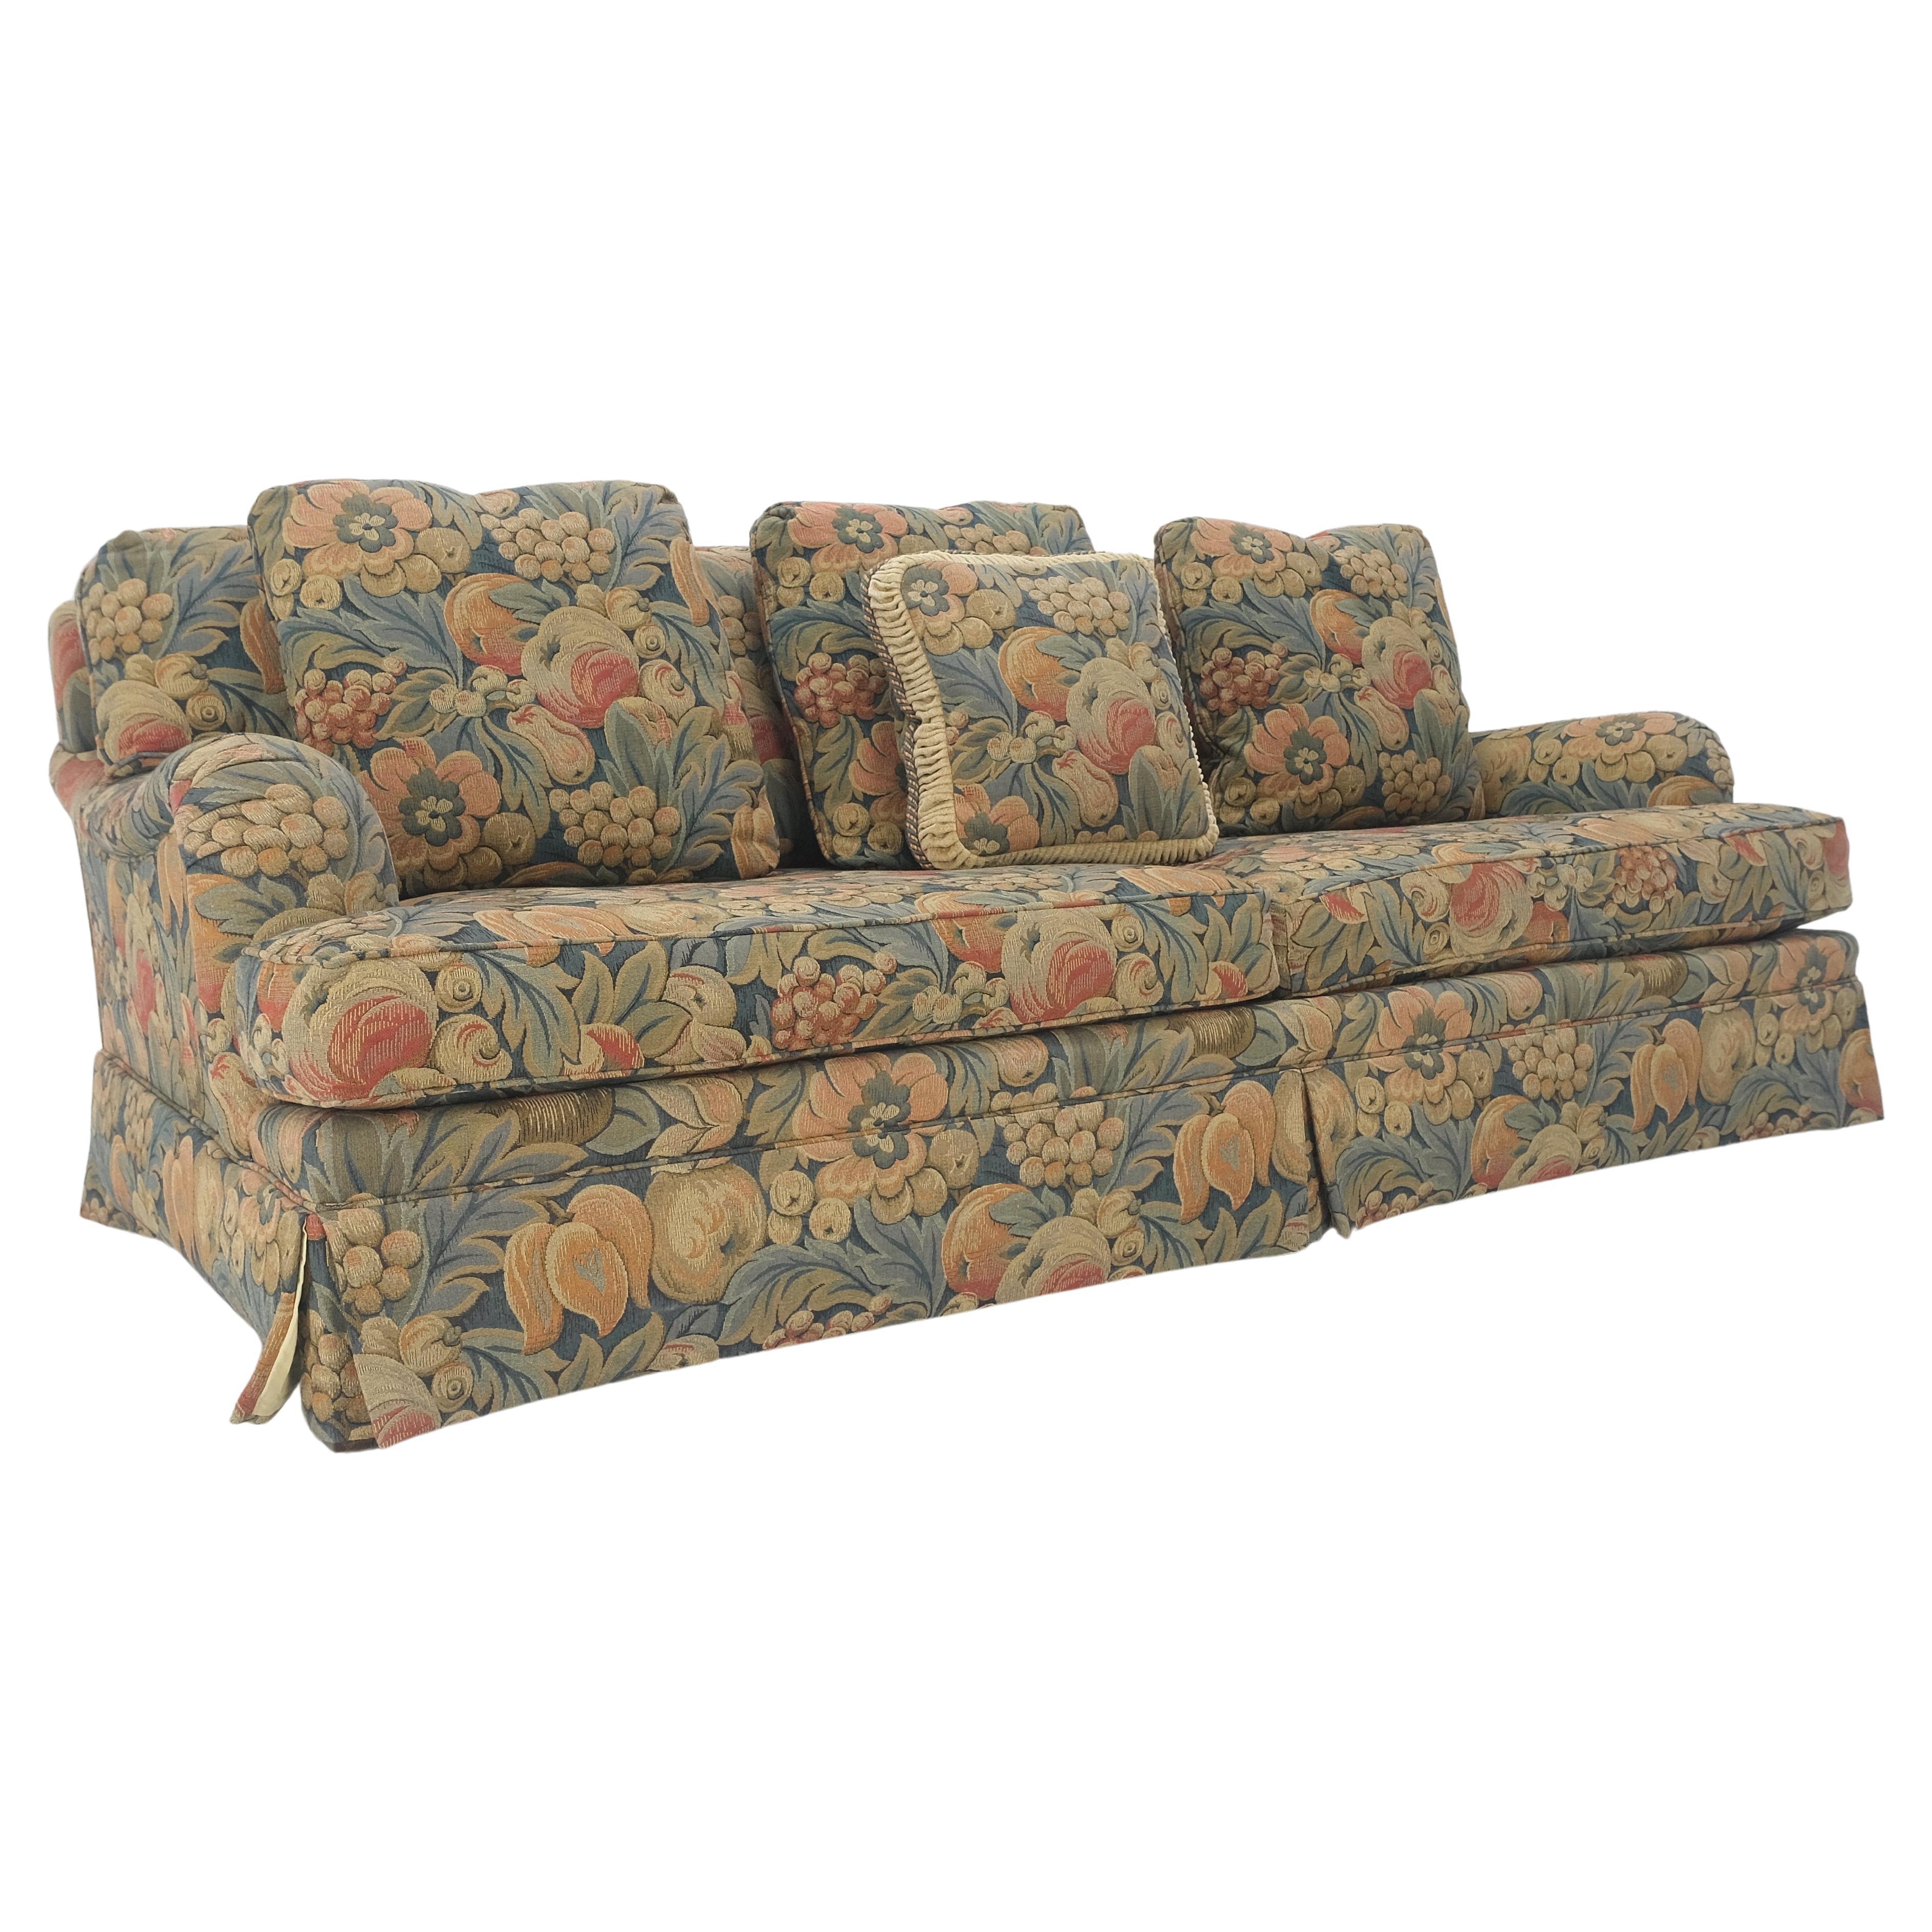 Country Baker Matching Pair of Two Floral Pattern Three Seater Traditional Sofas MINT!